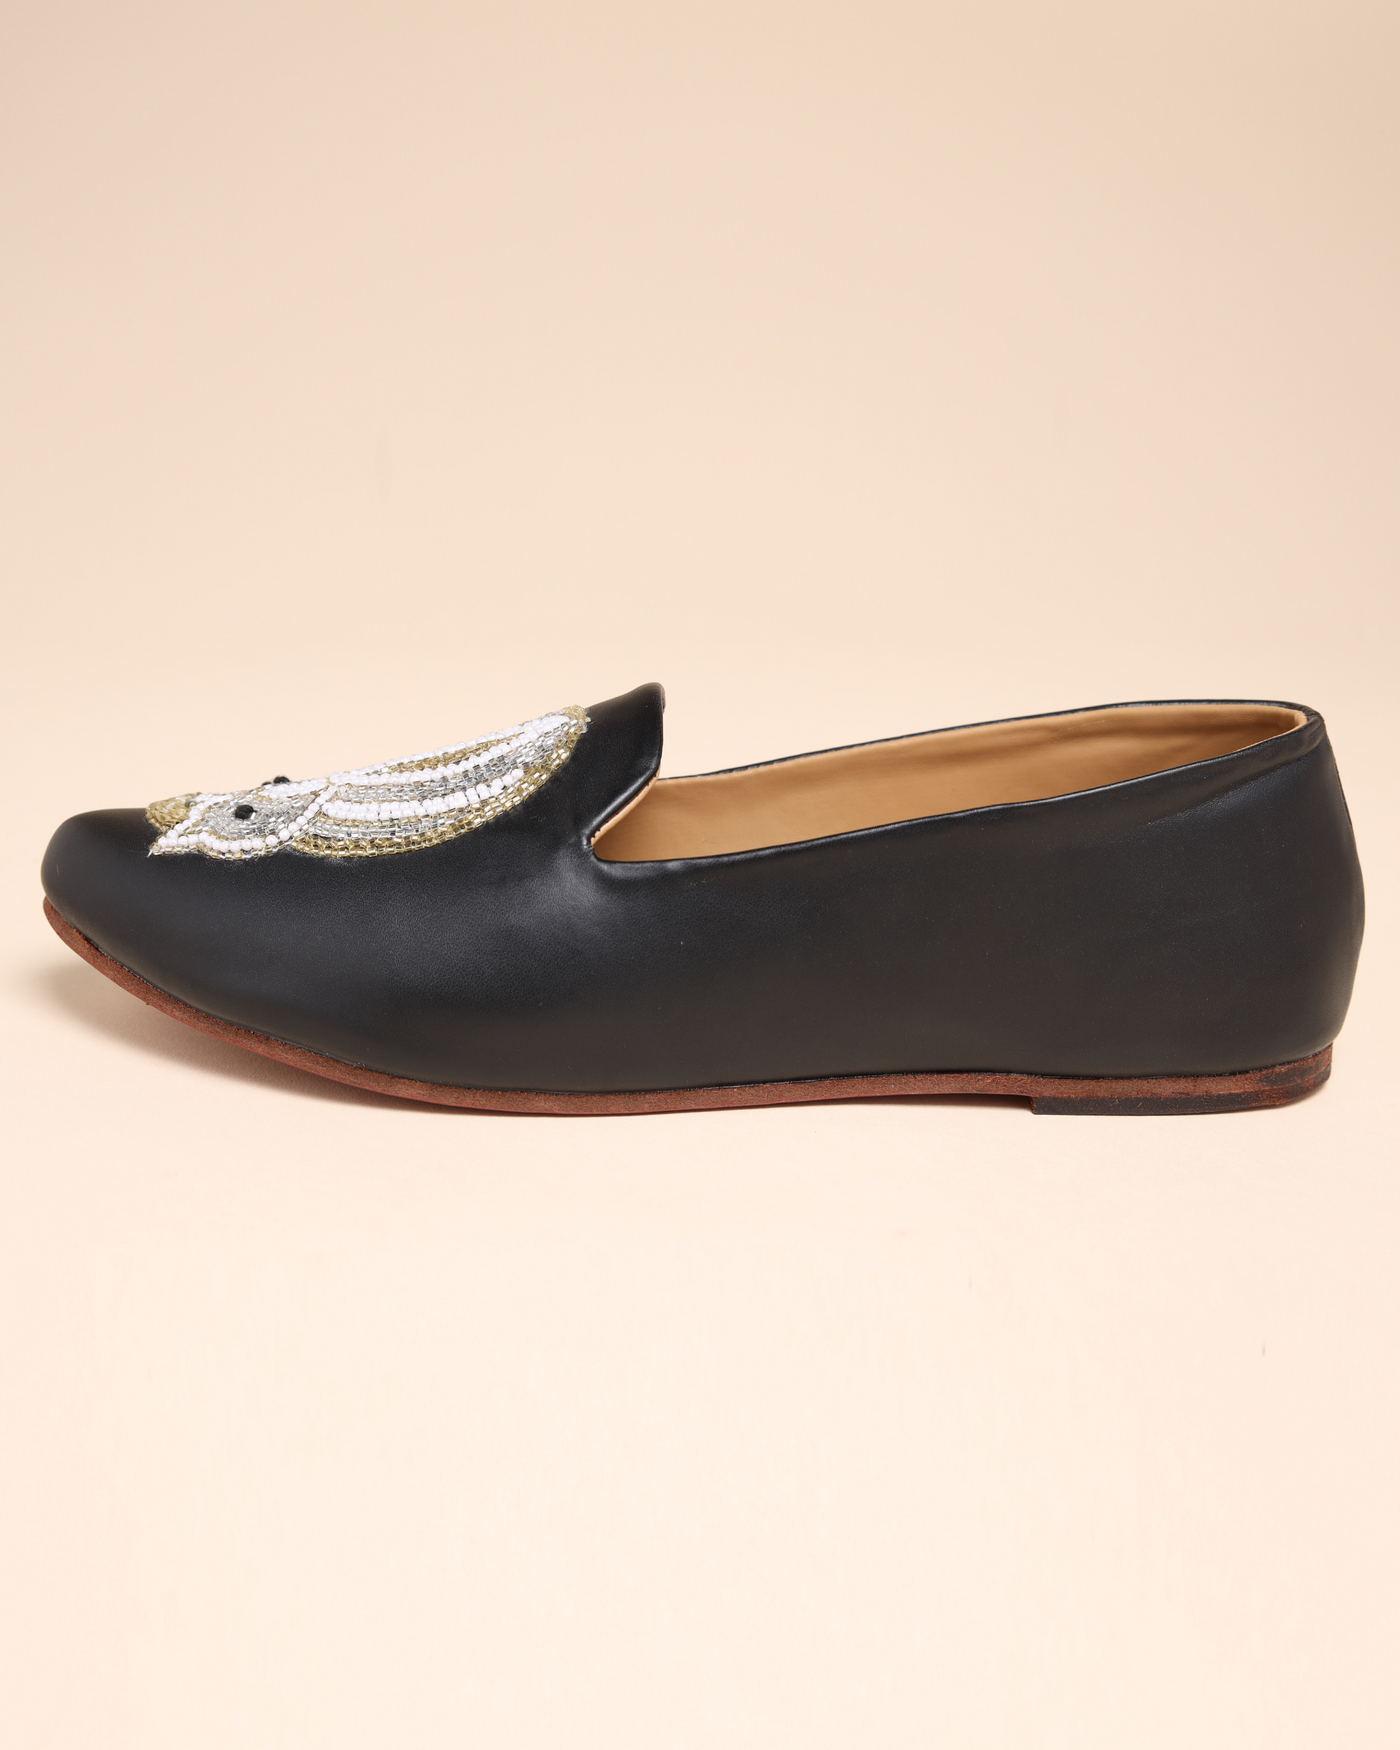 Baritone Black Handcrafted Loafers